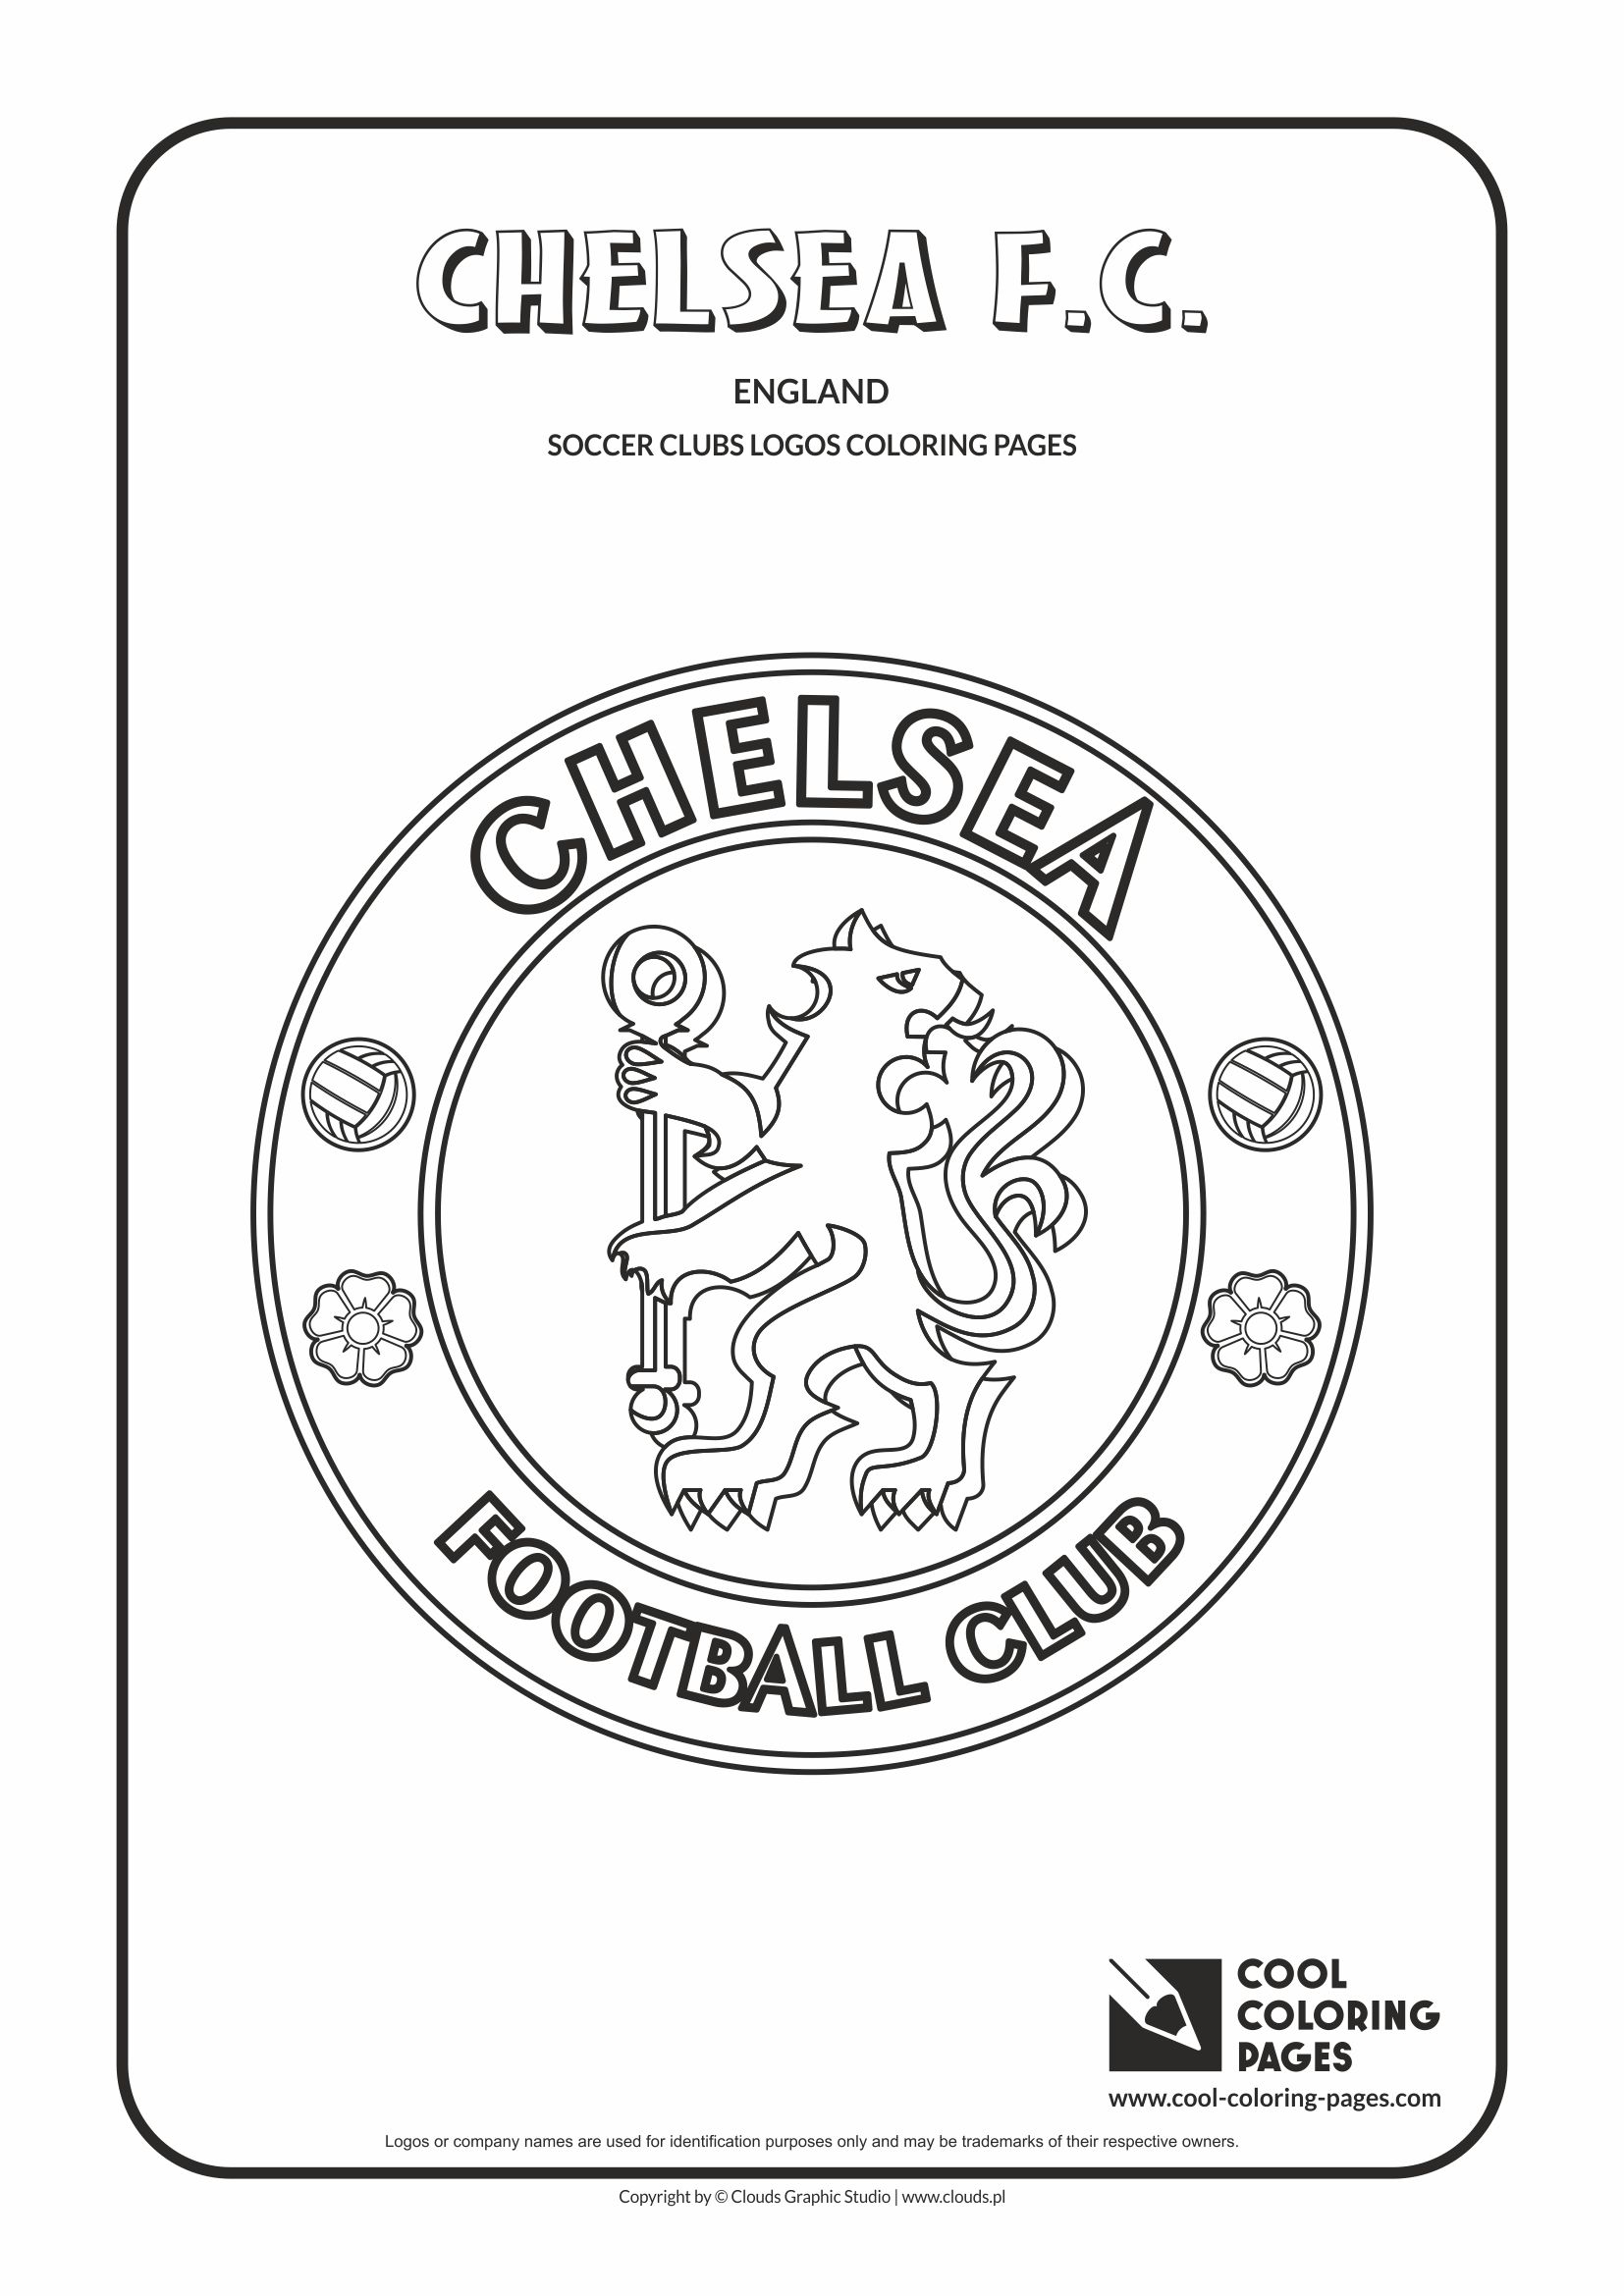 Cool Coloring Pages - Others / Chelsea F.C. logo / Coloring page with Chelsea F.C. logo